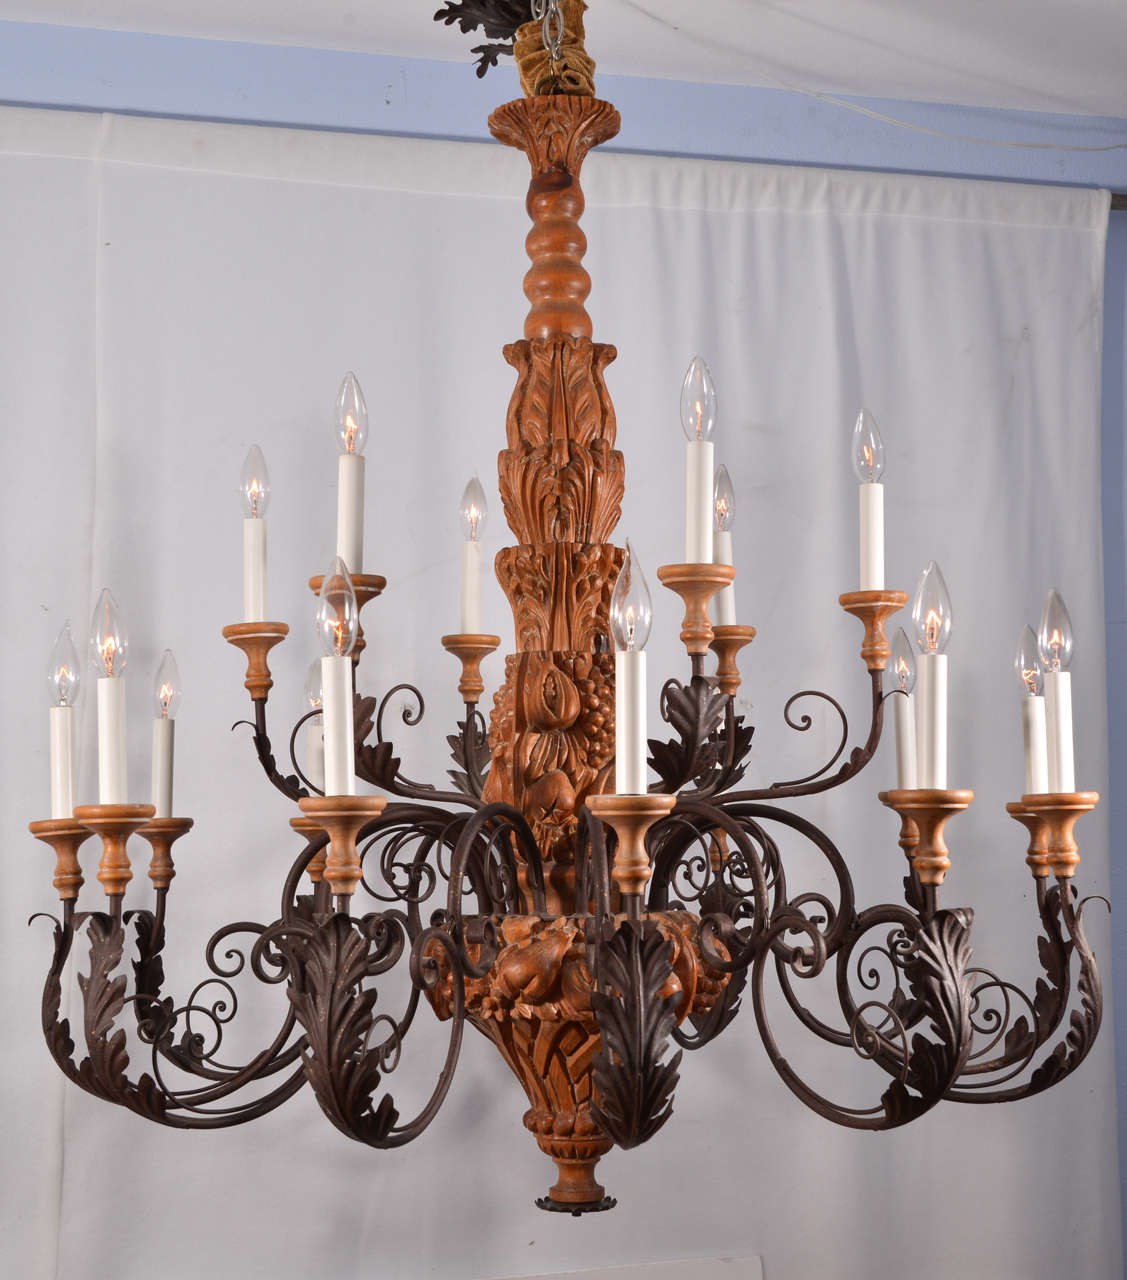 French Provincial Country French Hand Carved Wood with Graceful Scrolling Arms Chandelier